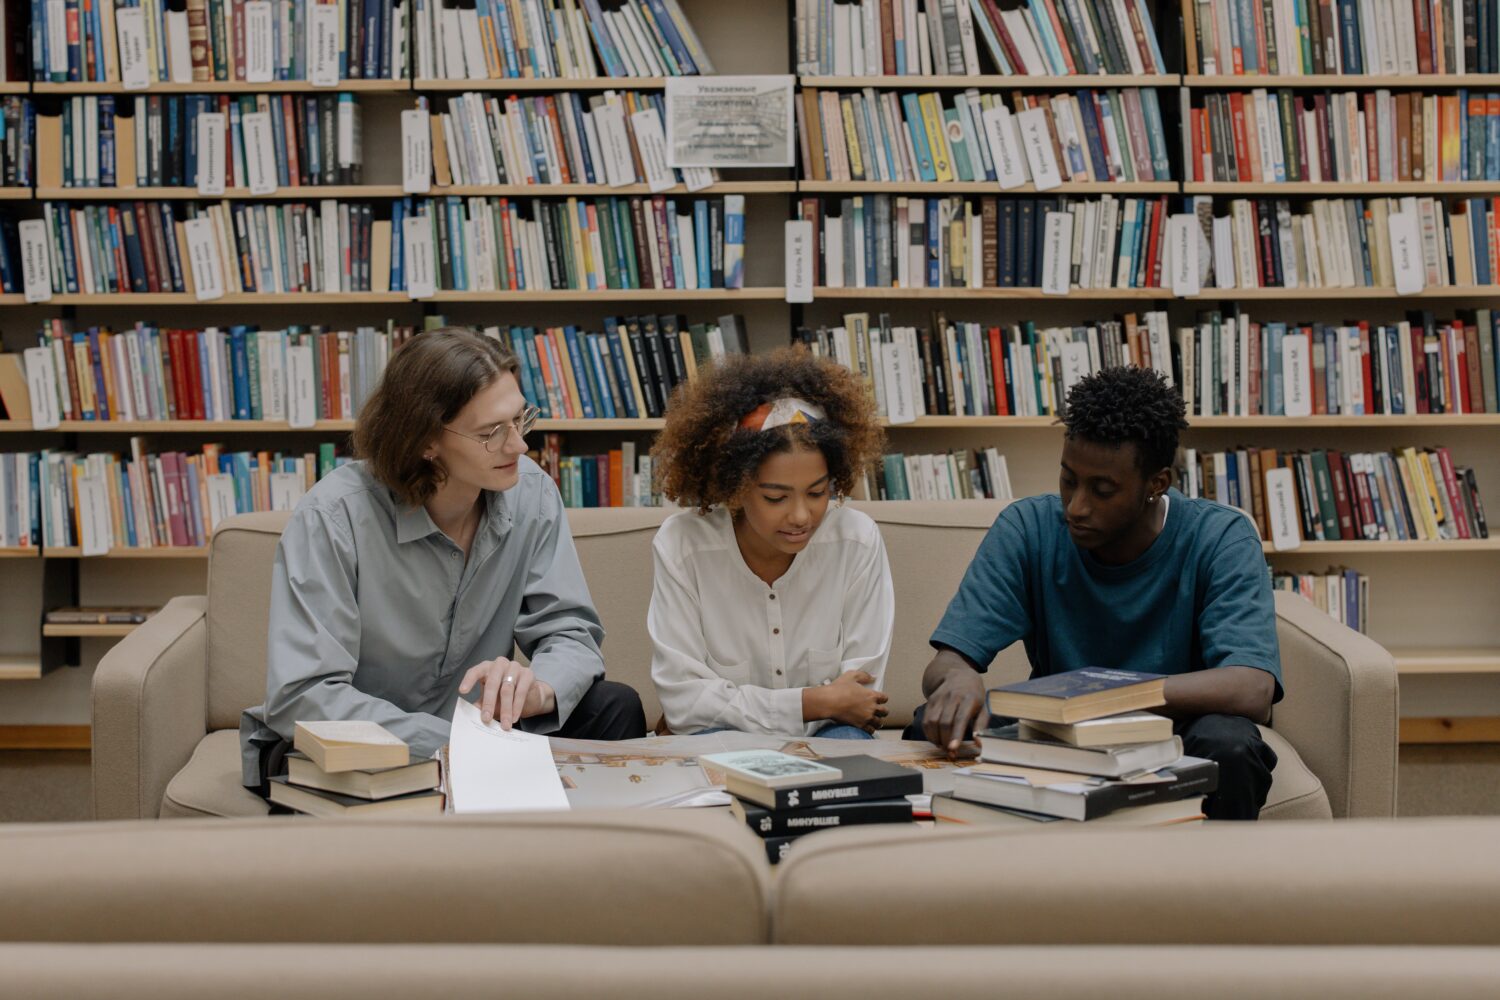 This image is taken in a library. There is a couch and three students sitting on it. There are two male students & one female student. They appear to be discussing something from a book. Behind the couch, there is a large book stand with lots of books.